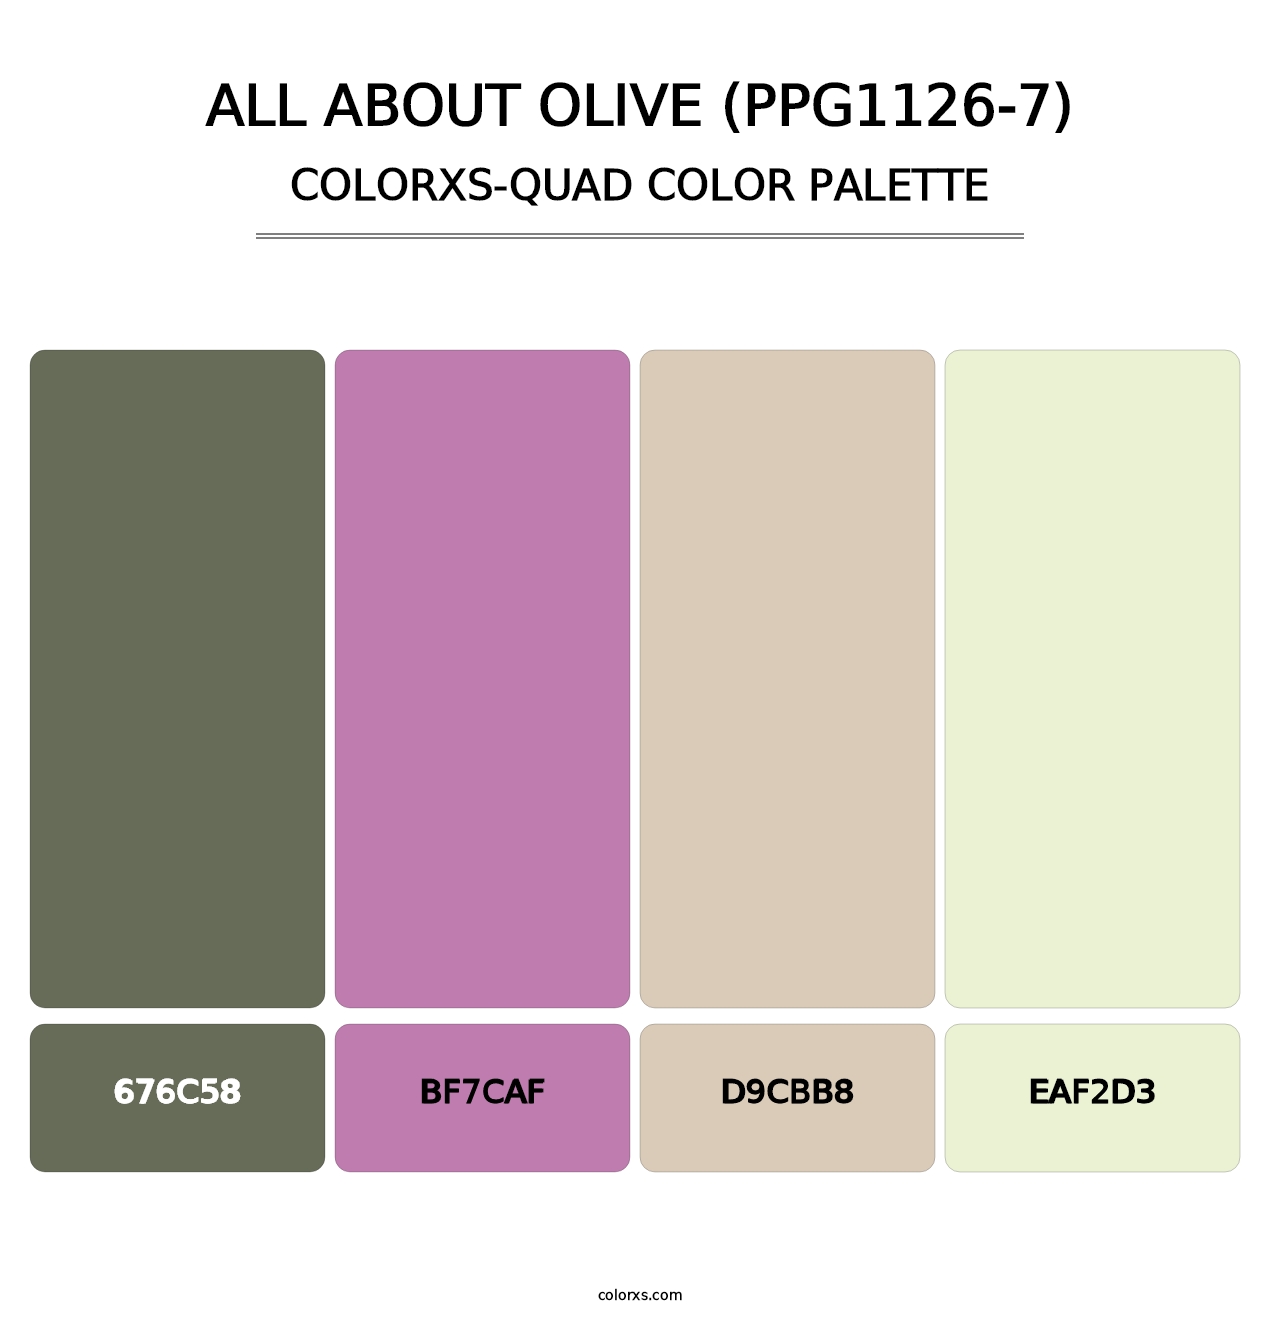 All About Olive (PPG1126-7) - Colorxs Quad Palette